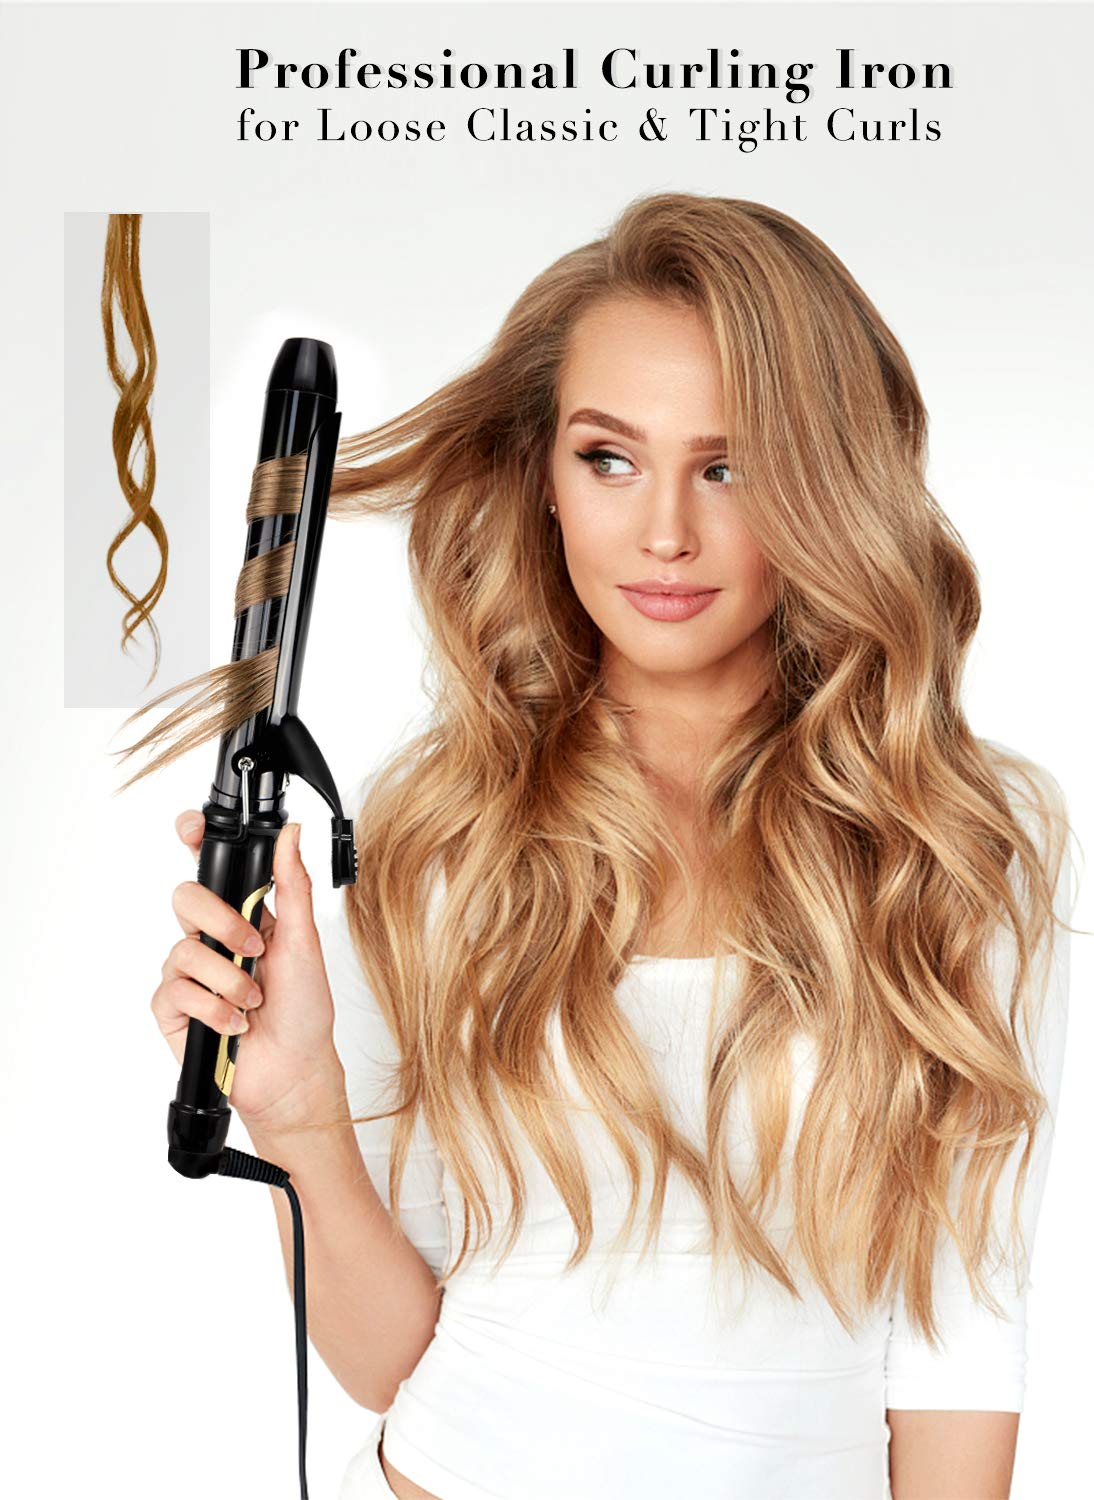 Lanvier 1.25 Inch Clipped Curling Iron with Extra Long Tourmaline Ceramic Barrel, Professional 1 1/4 Inch Hair Curler Curling Iron up to 450°F Dual Voltage for Traveling, Hair Waving Style Tool–Black